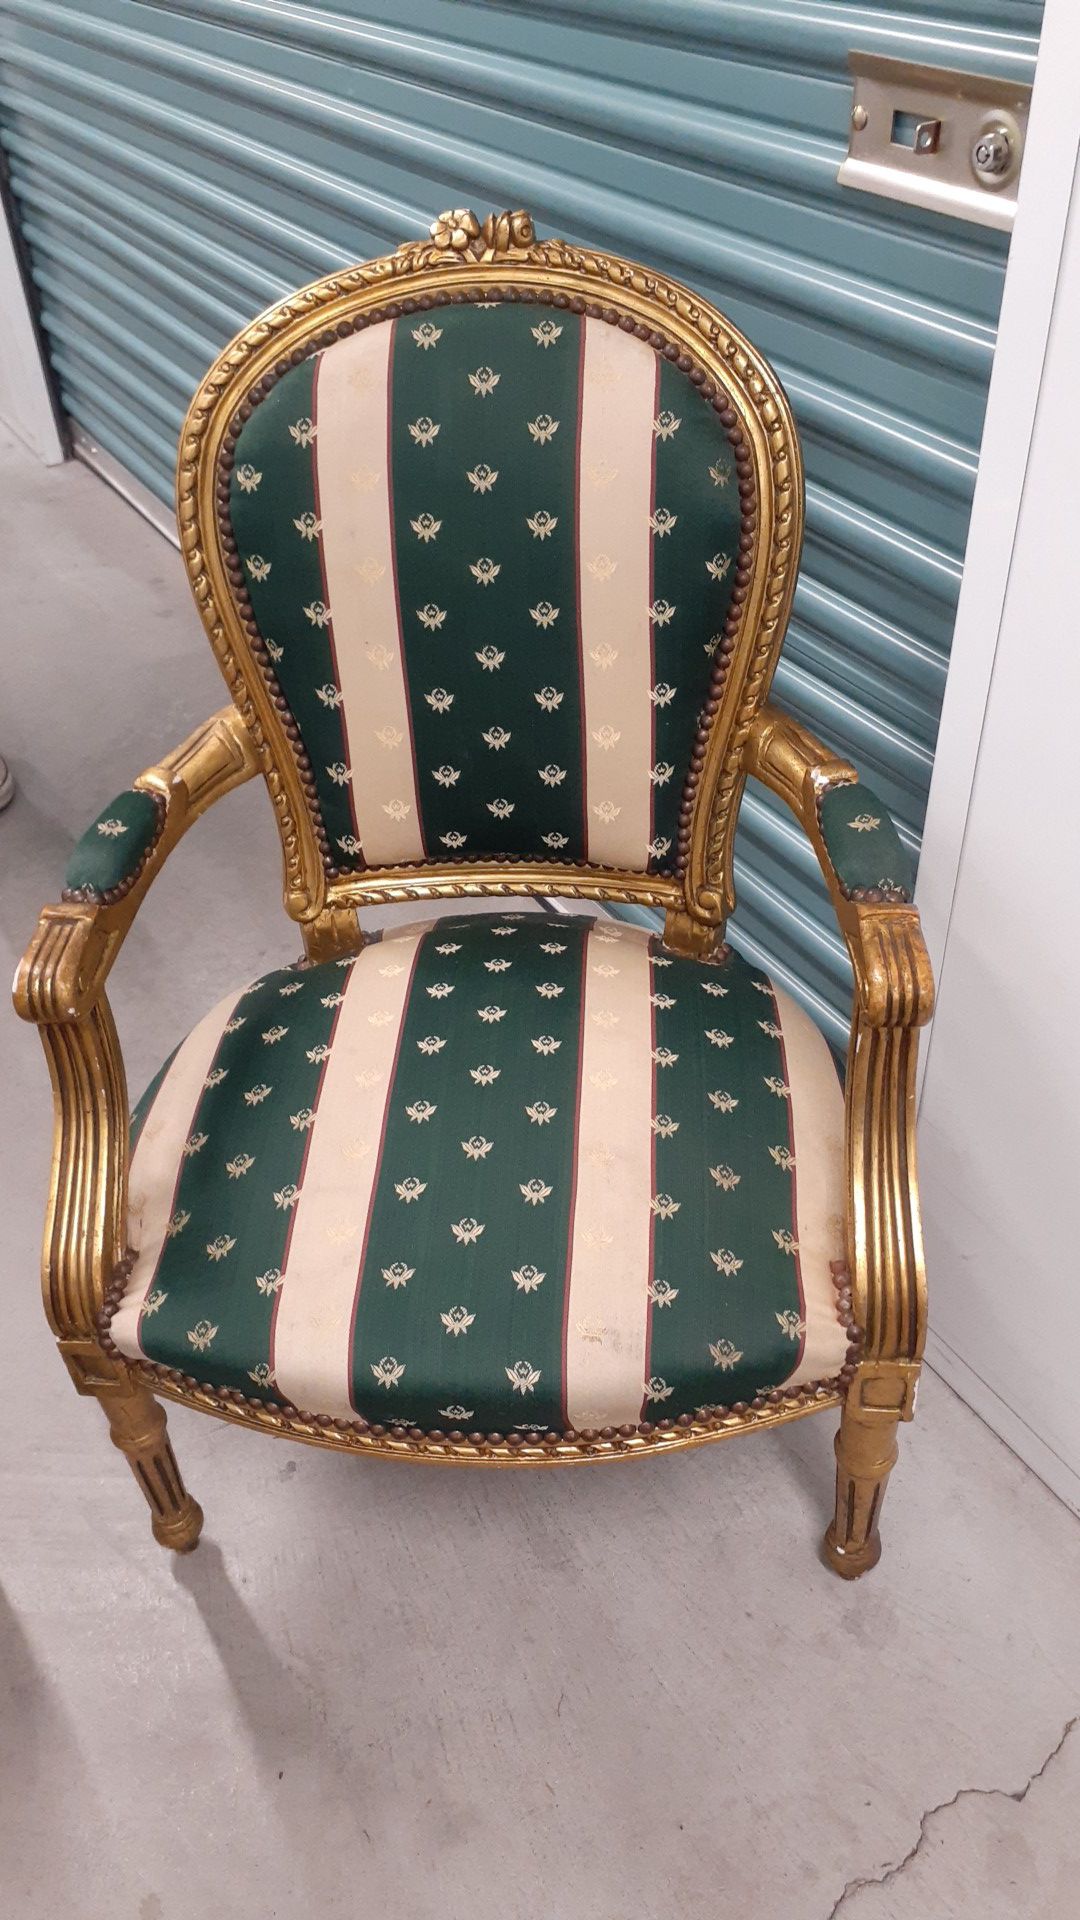 2 beauty originals French chairs.